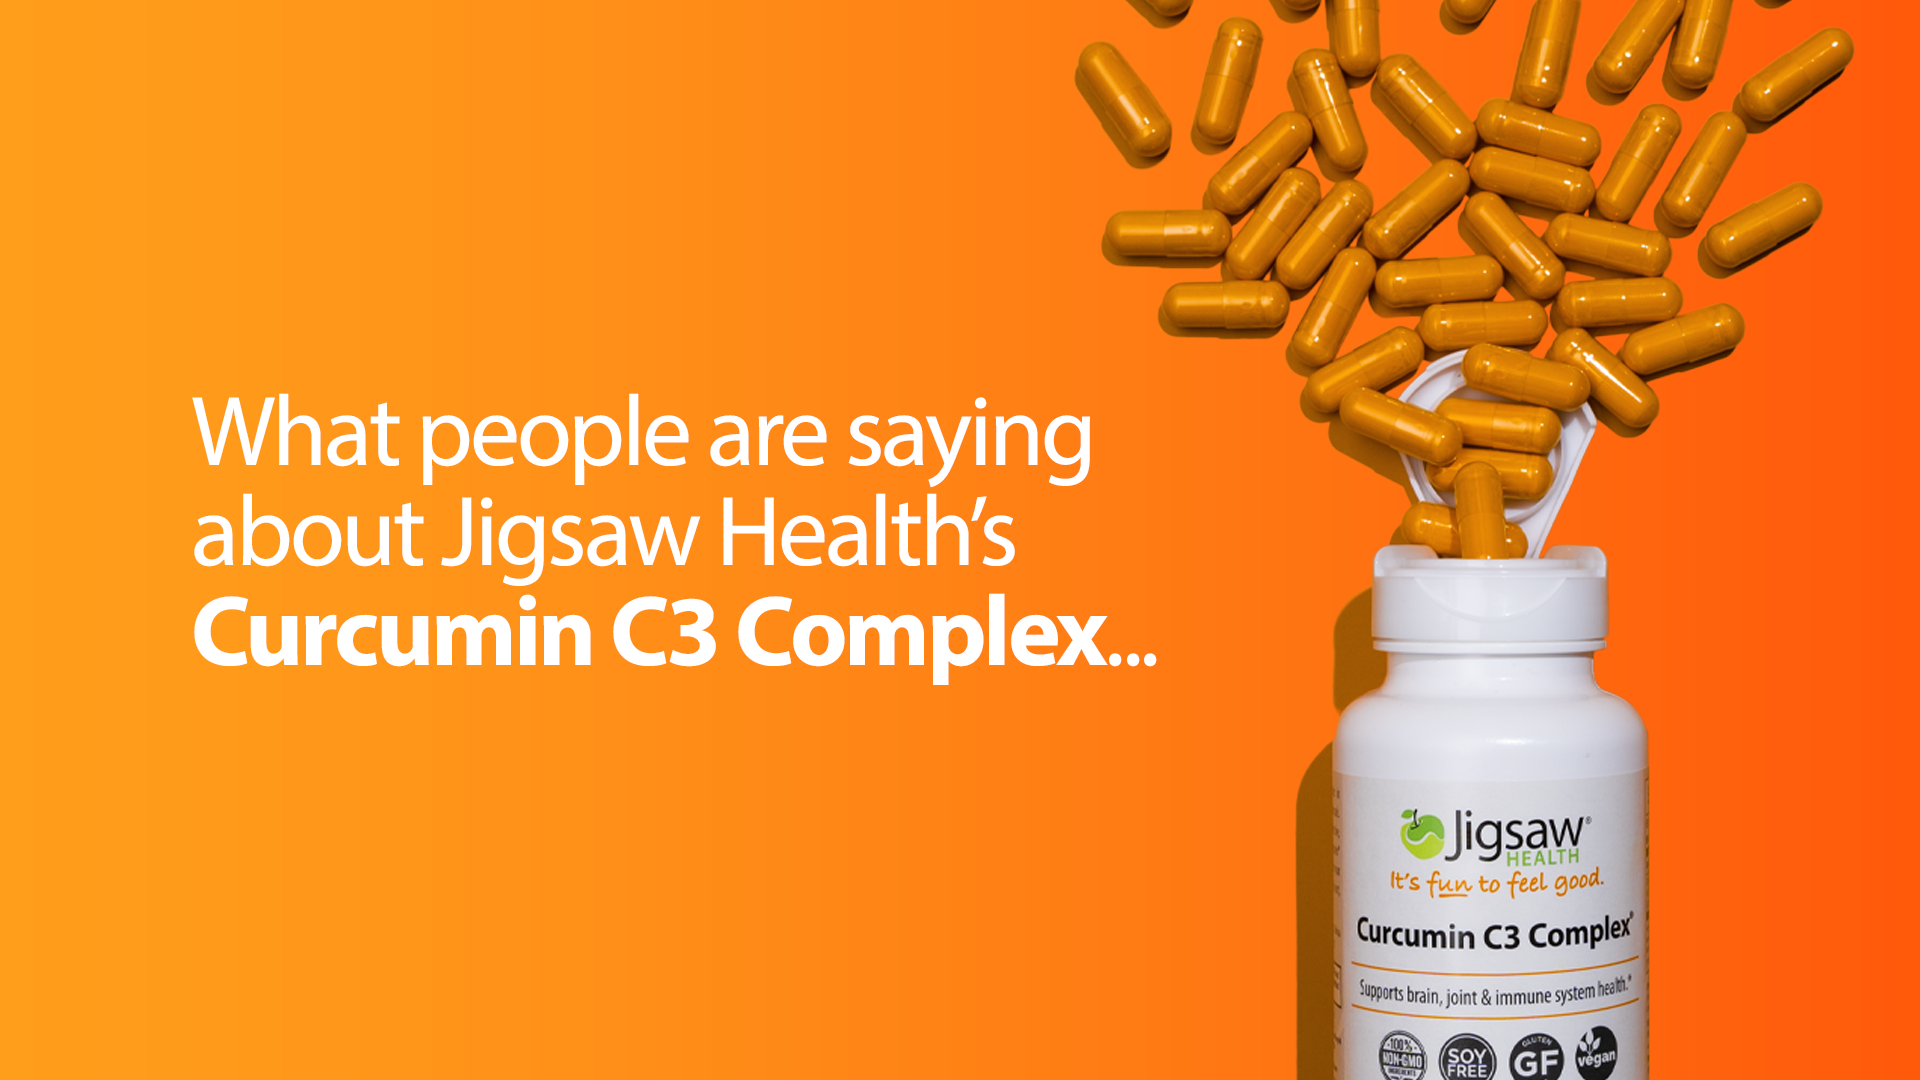 What are people saying about Jigsaw Health's Curcumin C3 Complex?